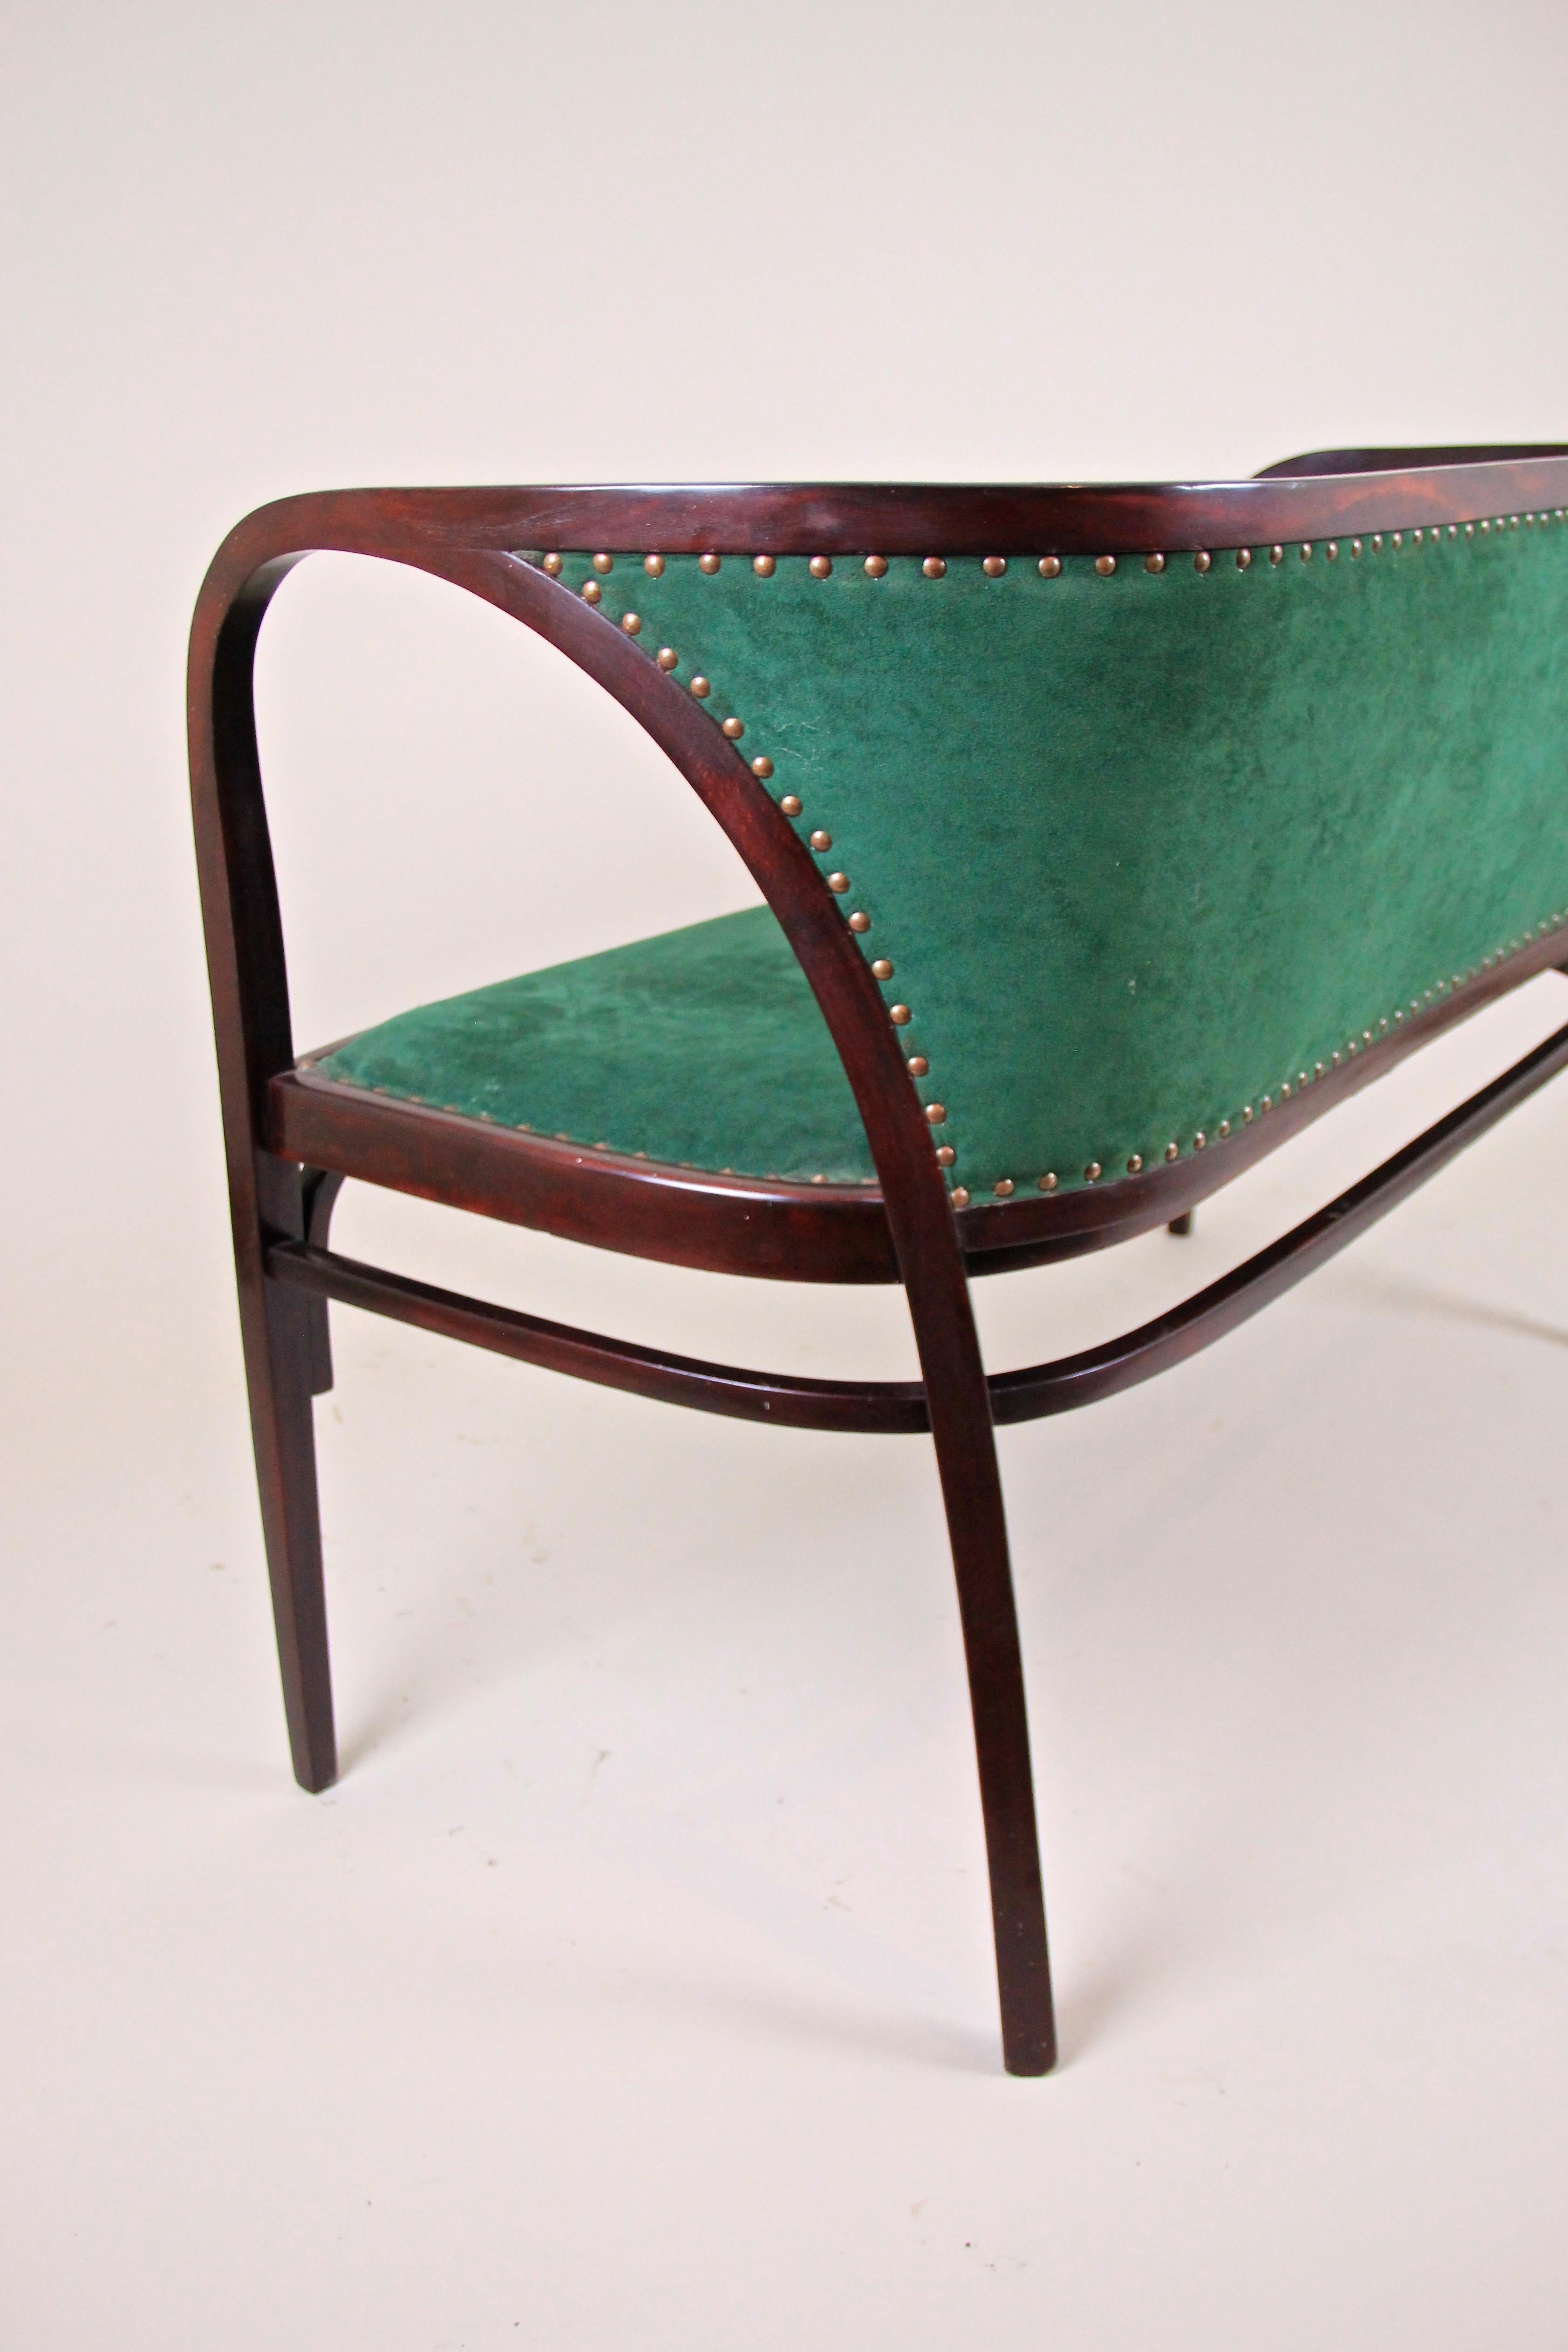 Thonet Bentwood Seating Set/ Salon Suite by M. Kammerer, Austria, circa 1910 For Sale 5